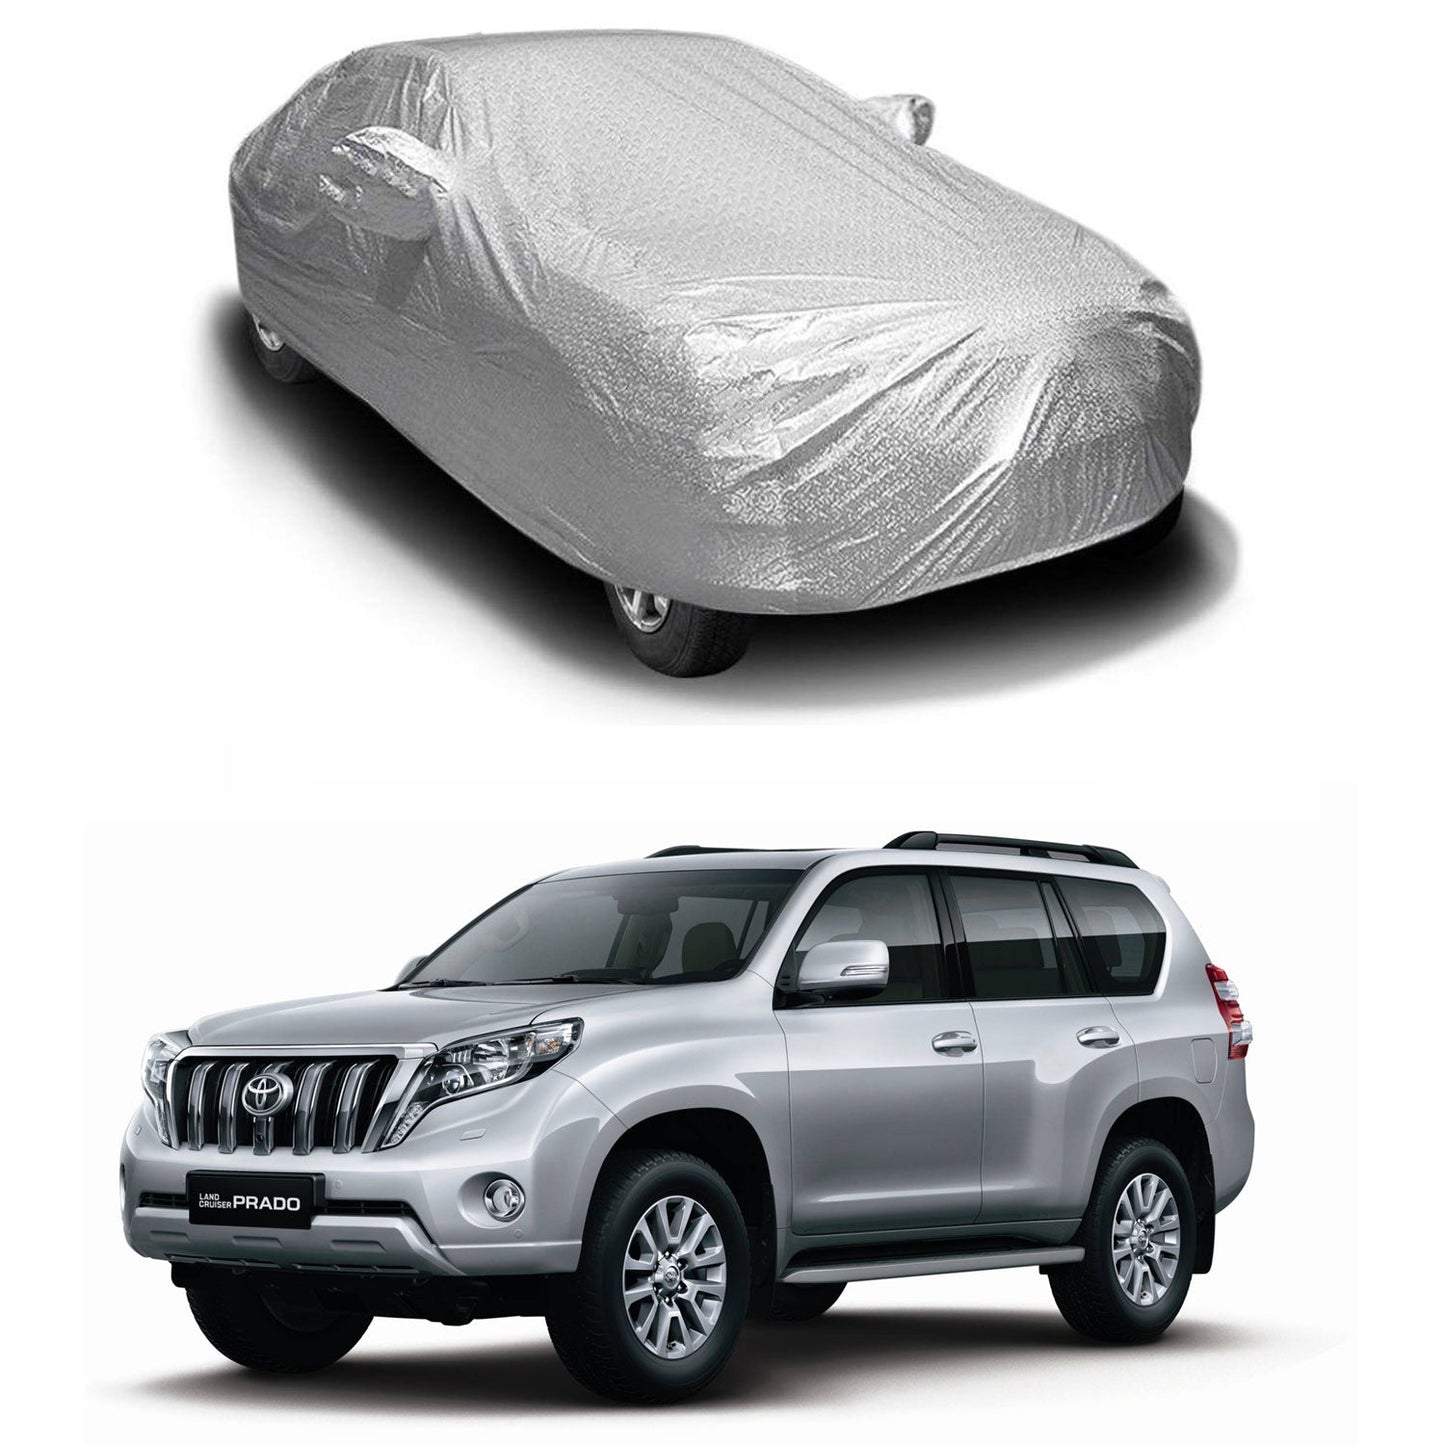 Oshotto Spyro Silver Anti Reflective, dustproof and Water Proof Car Body Cover with Mirror Pockets For Toyota Land Cruiser Prado